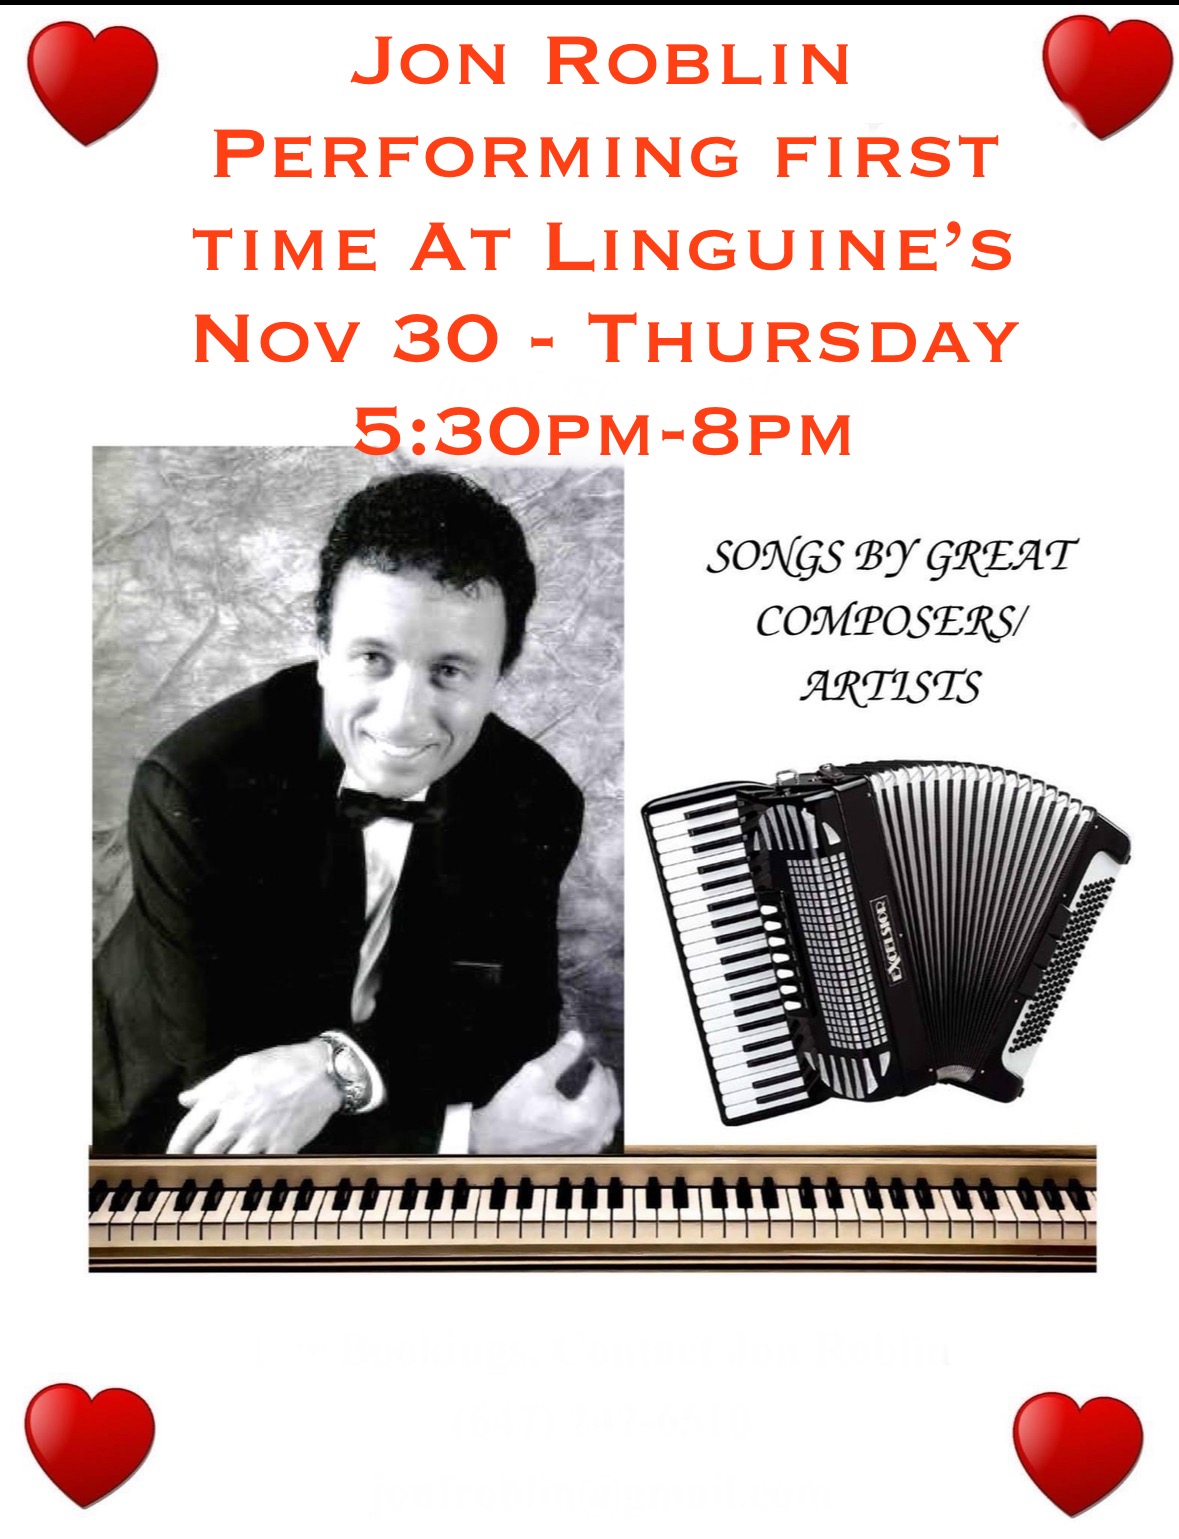 Poster that says Jon Roblin performing first time at Linguine's, black and white photo of man next to accordian